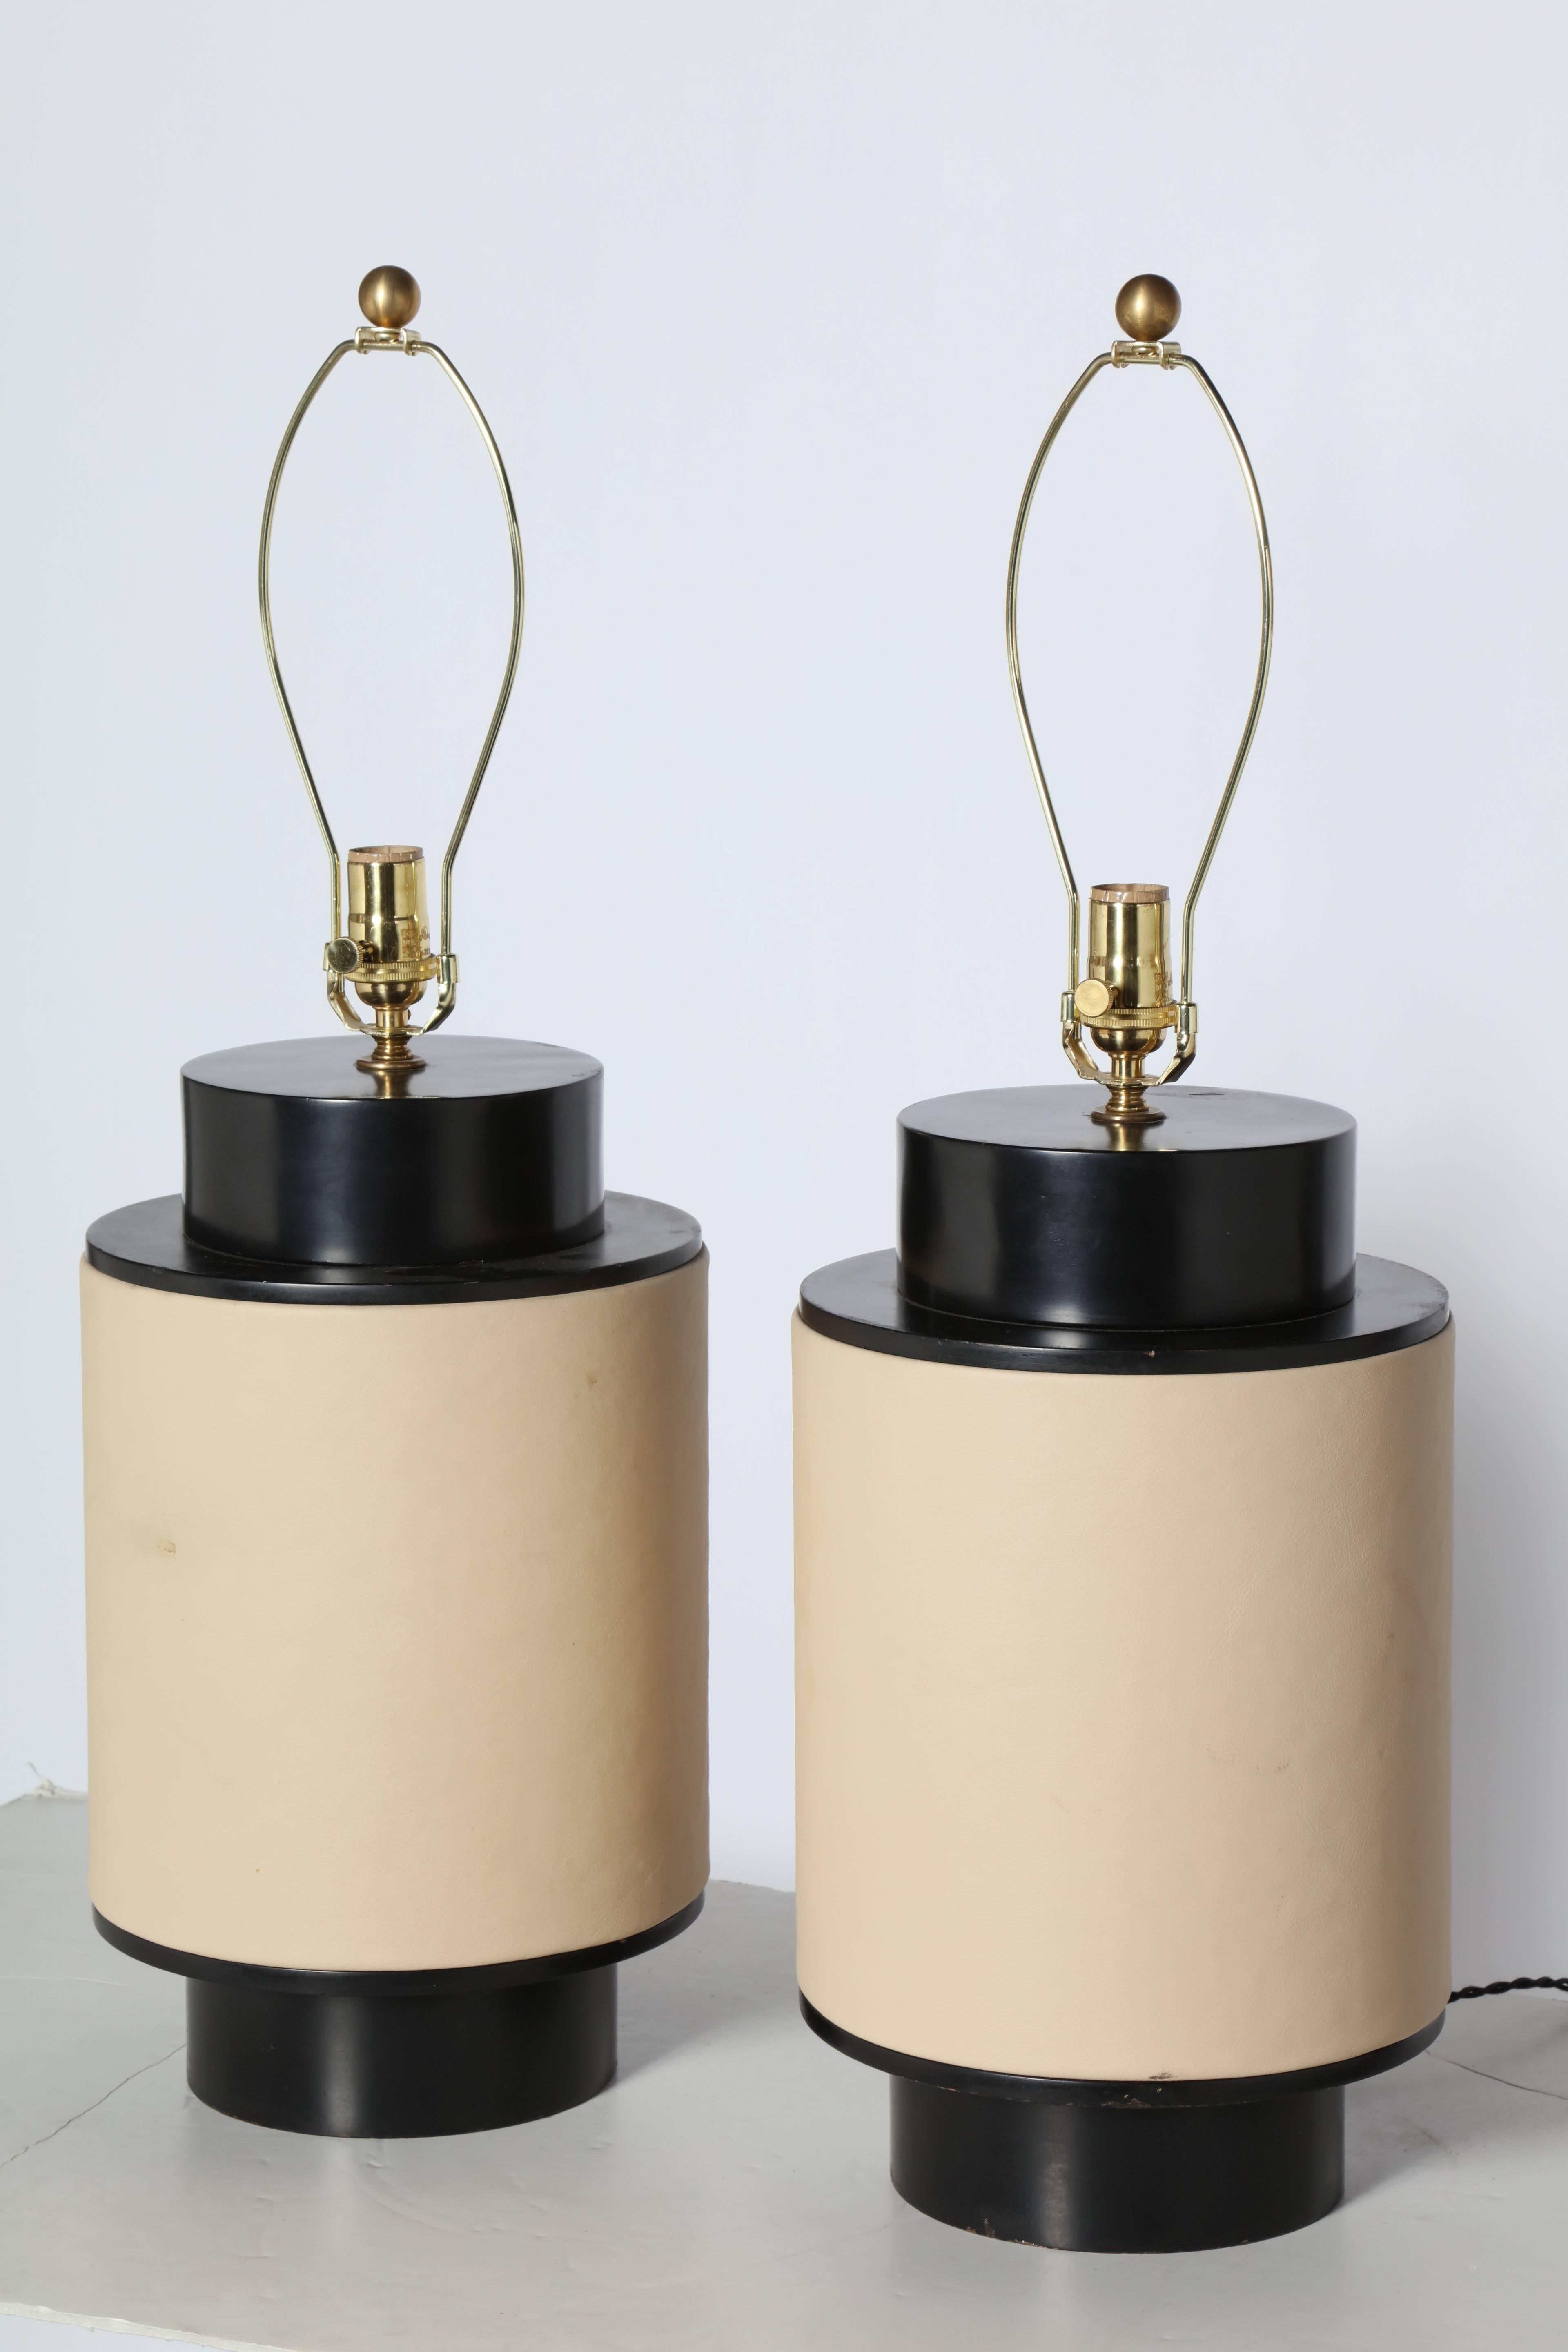 Large Pair of Tan Wrapped Leather and Black Barrel Table Lamps, Circa 1950. Featuring wide, set back, ebonized Black enameled Wood Barrel forms, center wrapped in taut Beige Leather. Top of Finial: 29.5H. Top Black Enamel: 16.75H. Top of Barrel: